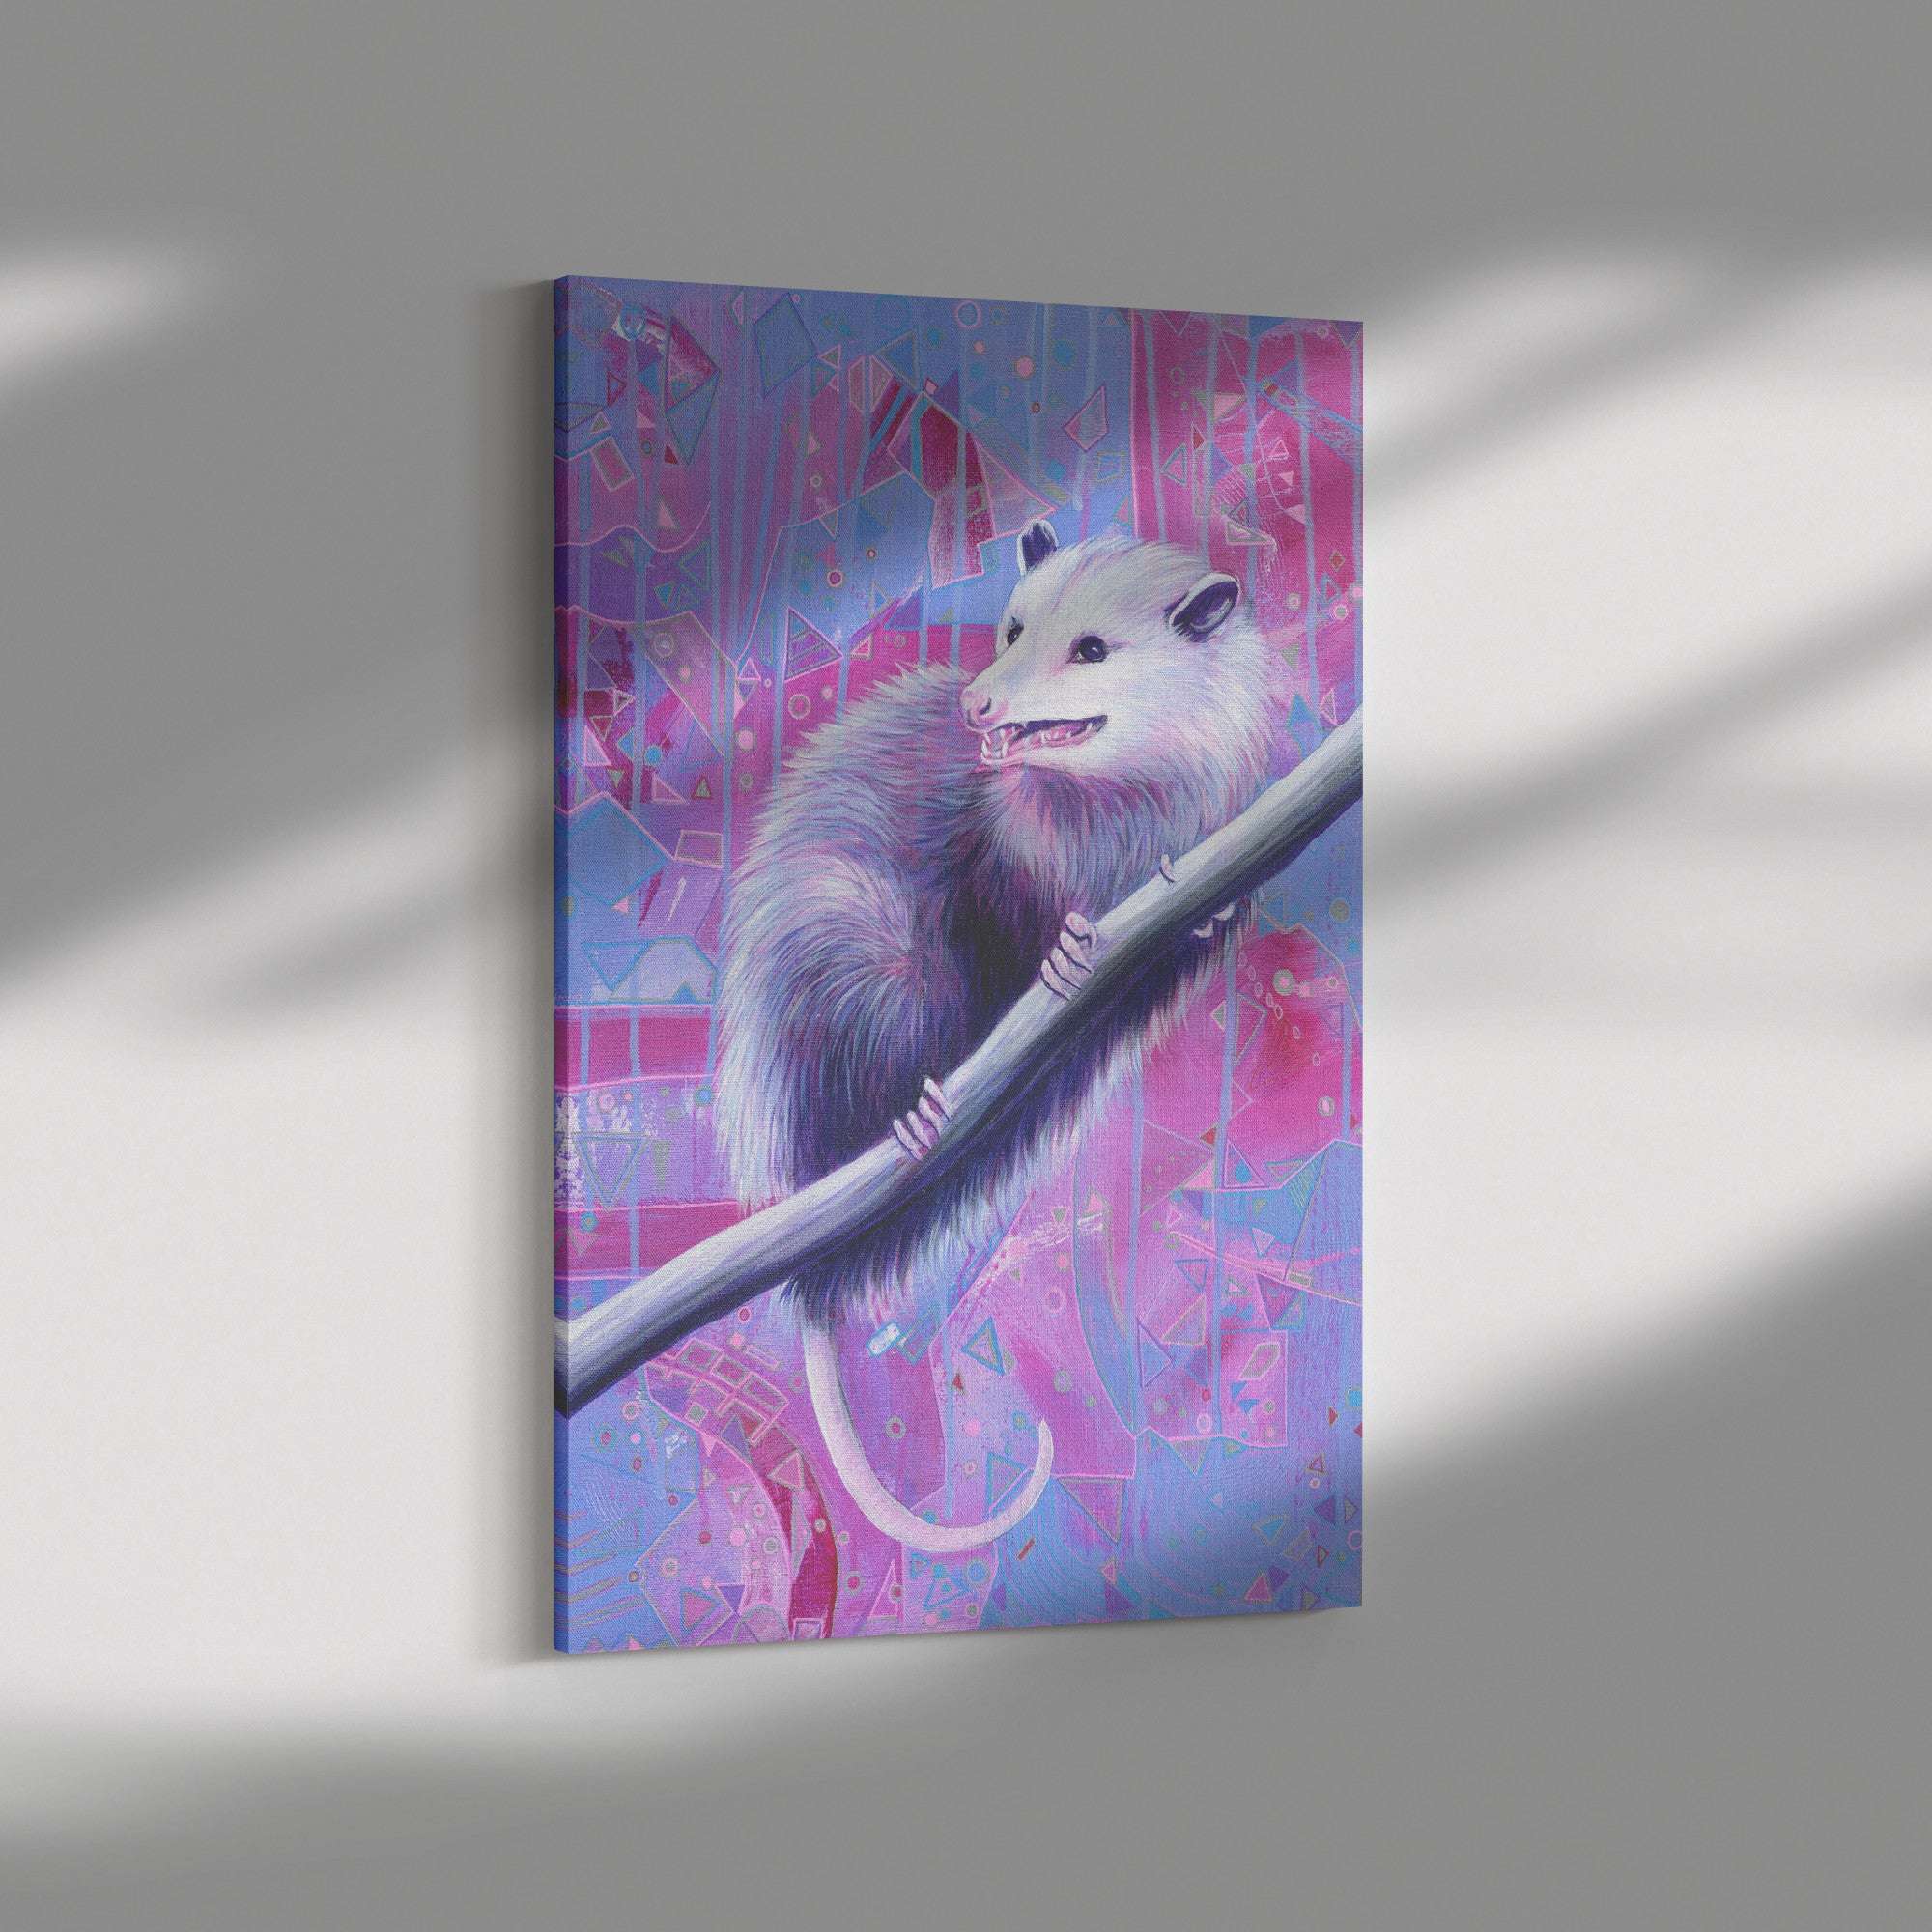 A vibrant opossum canvas print depicting an ethereal white opossum perched on a silver brush, set against a colorful, geometric background.